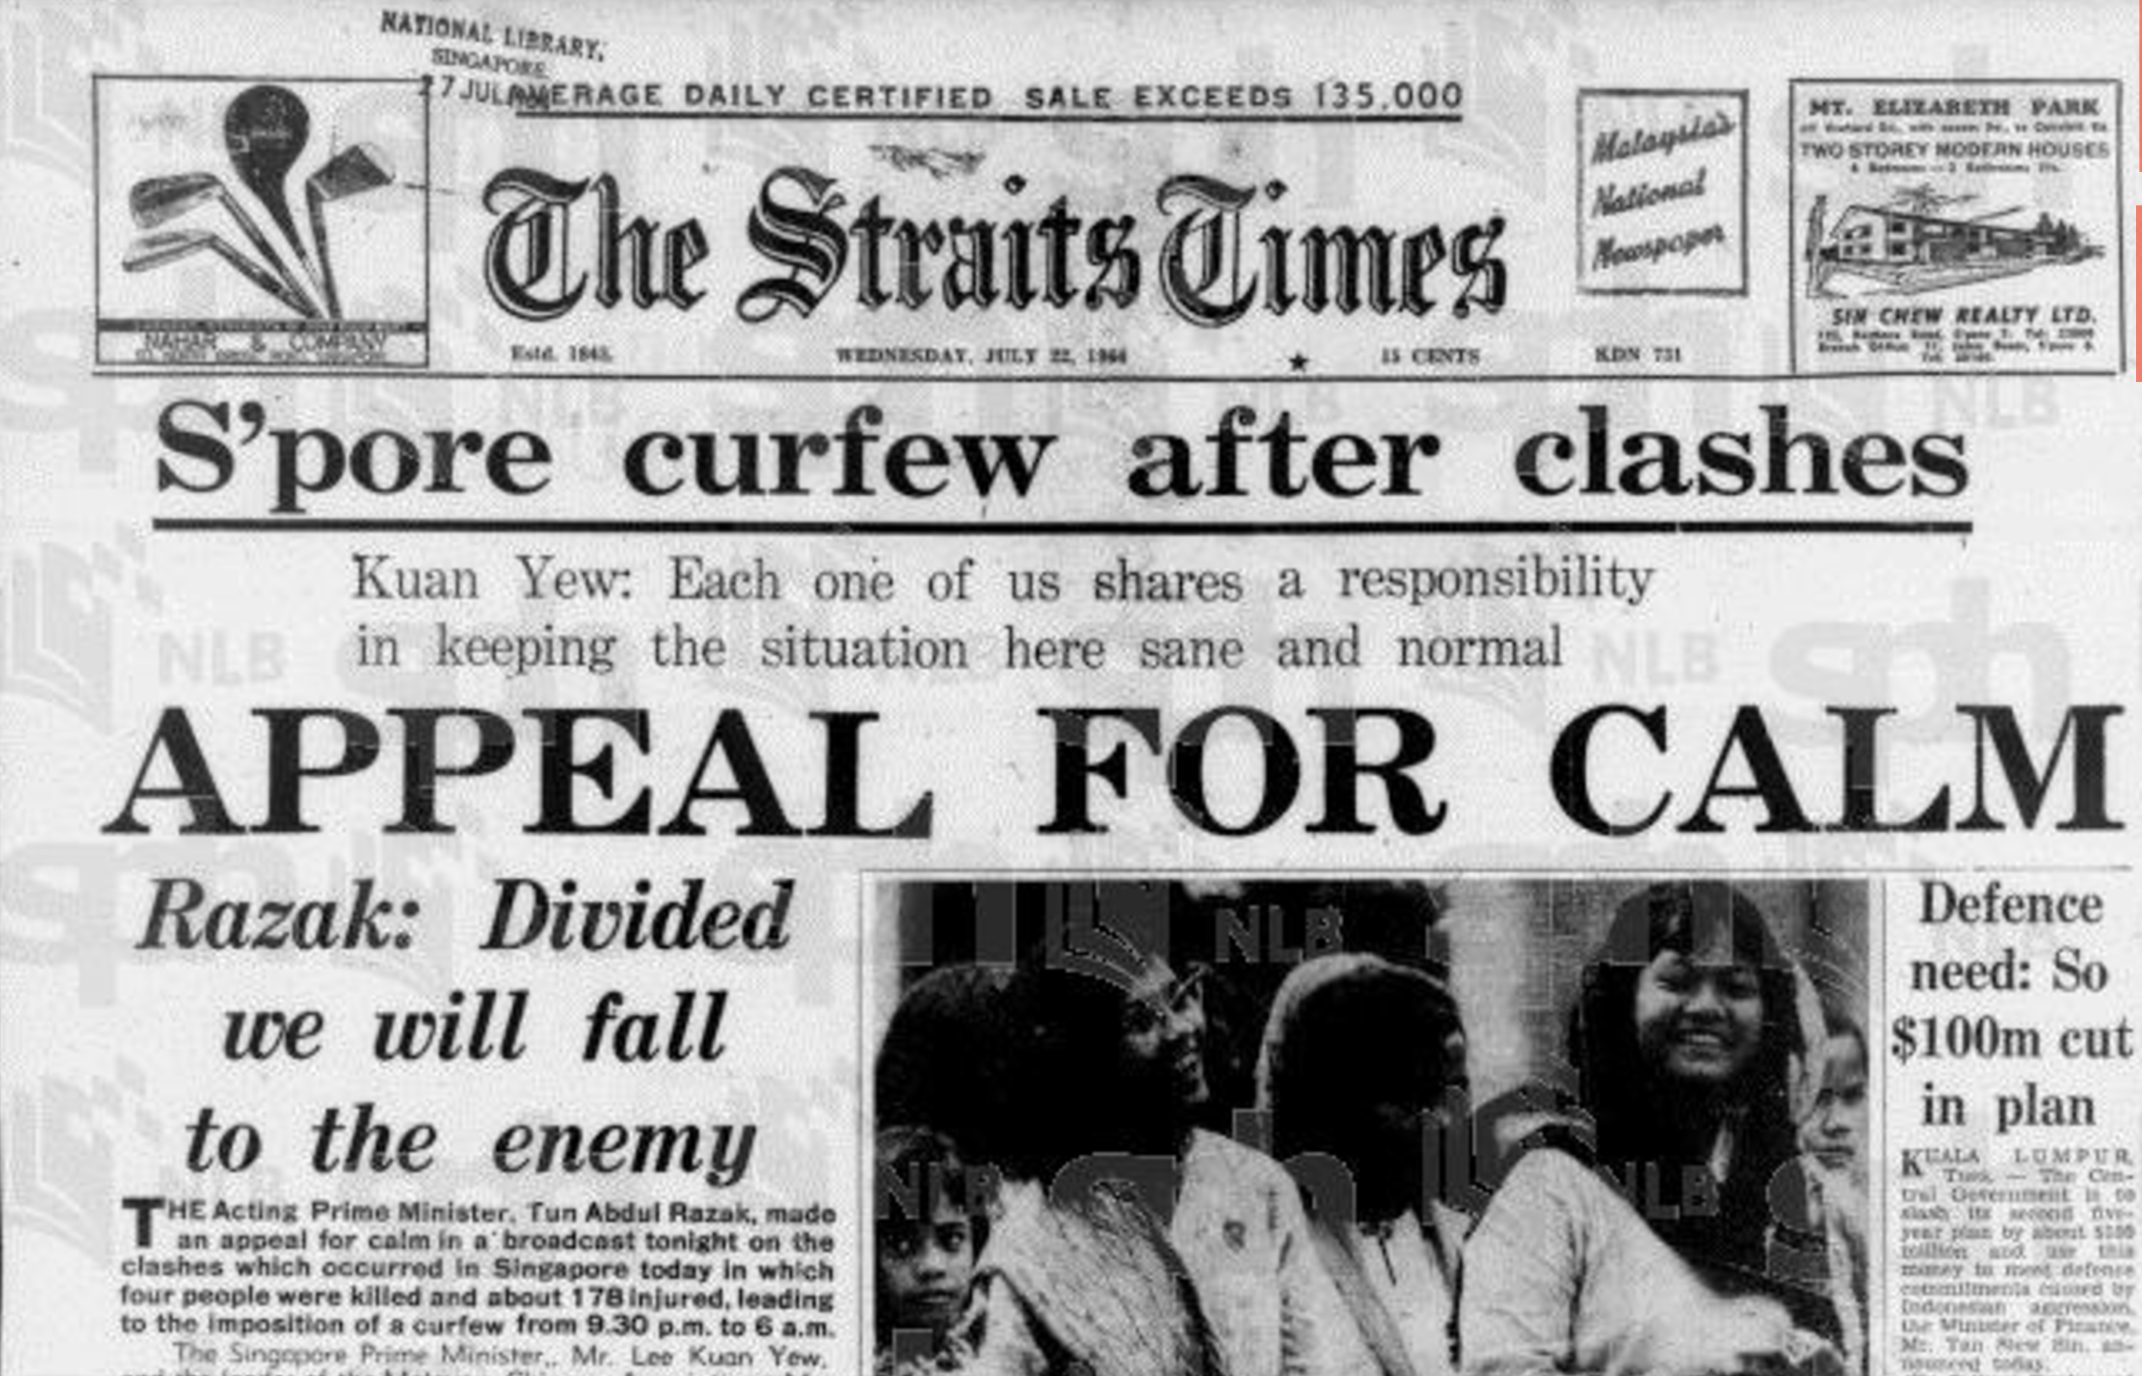 See the realities of S'pore's 1964 racial riots from these stories ...